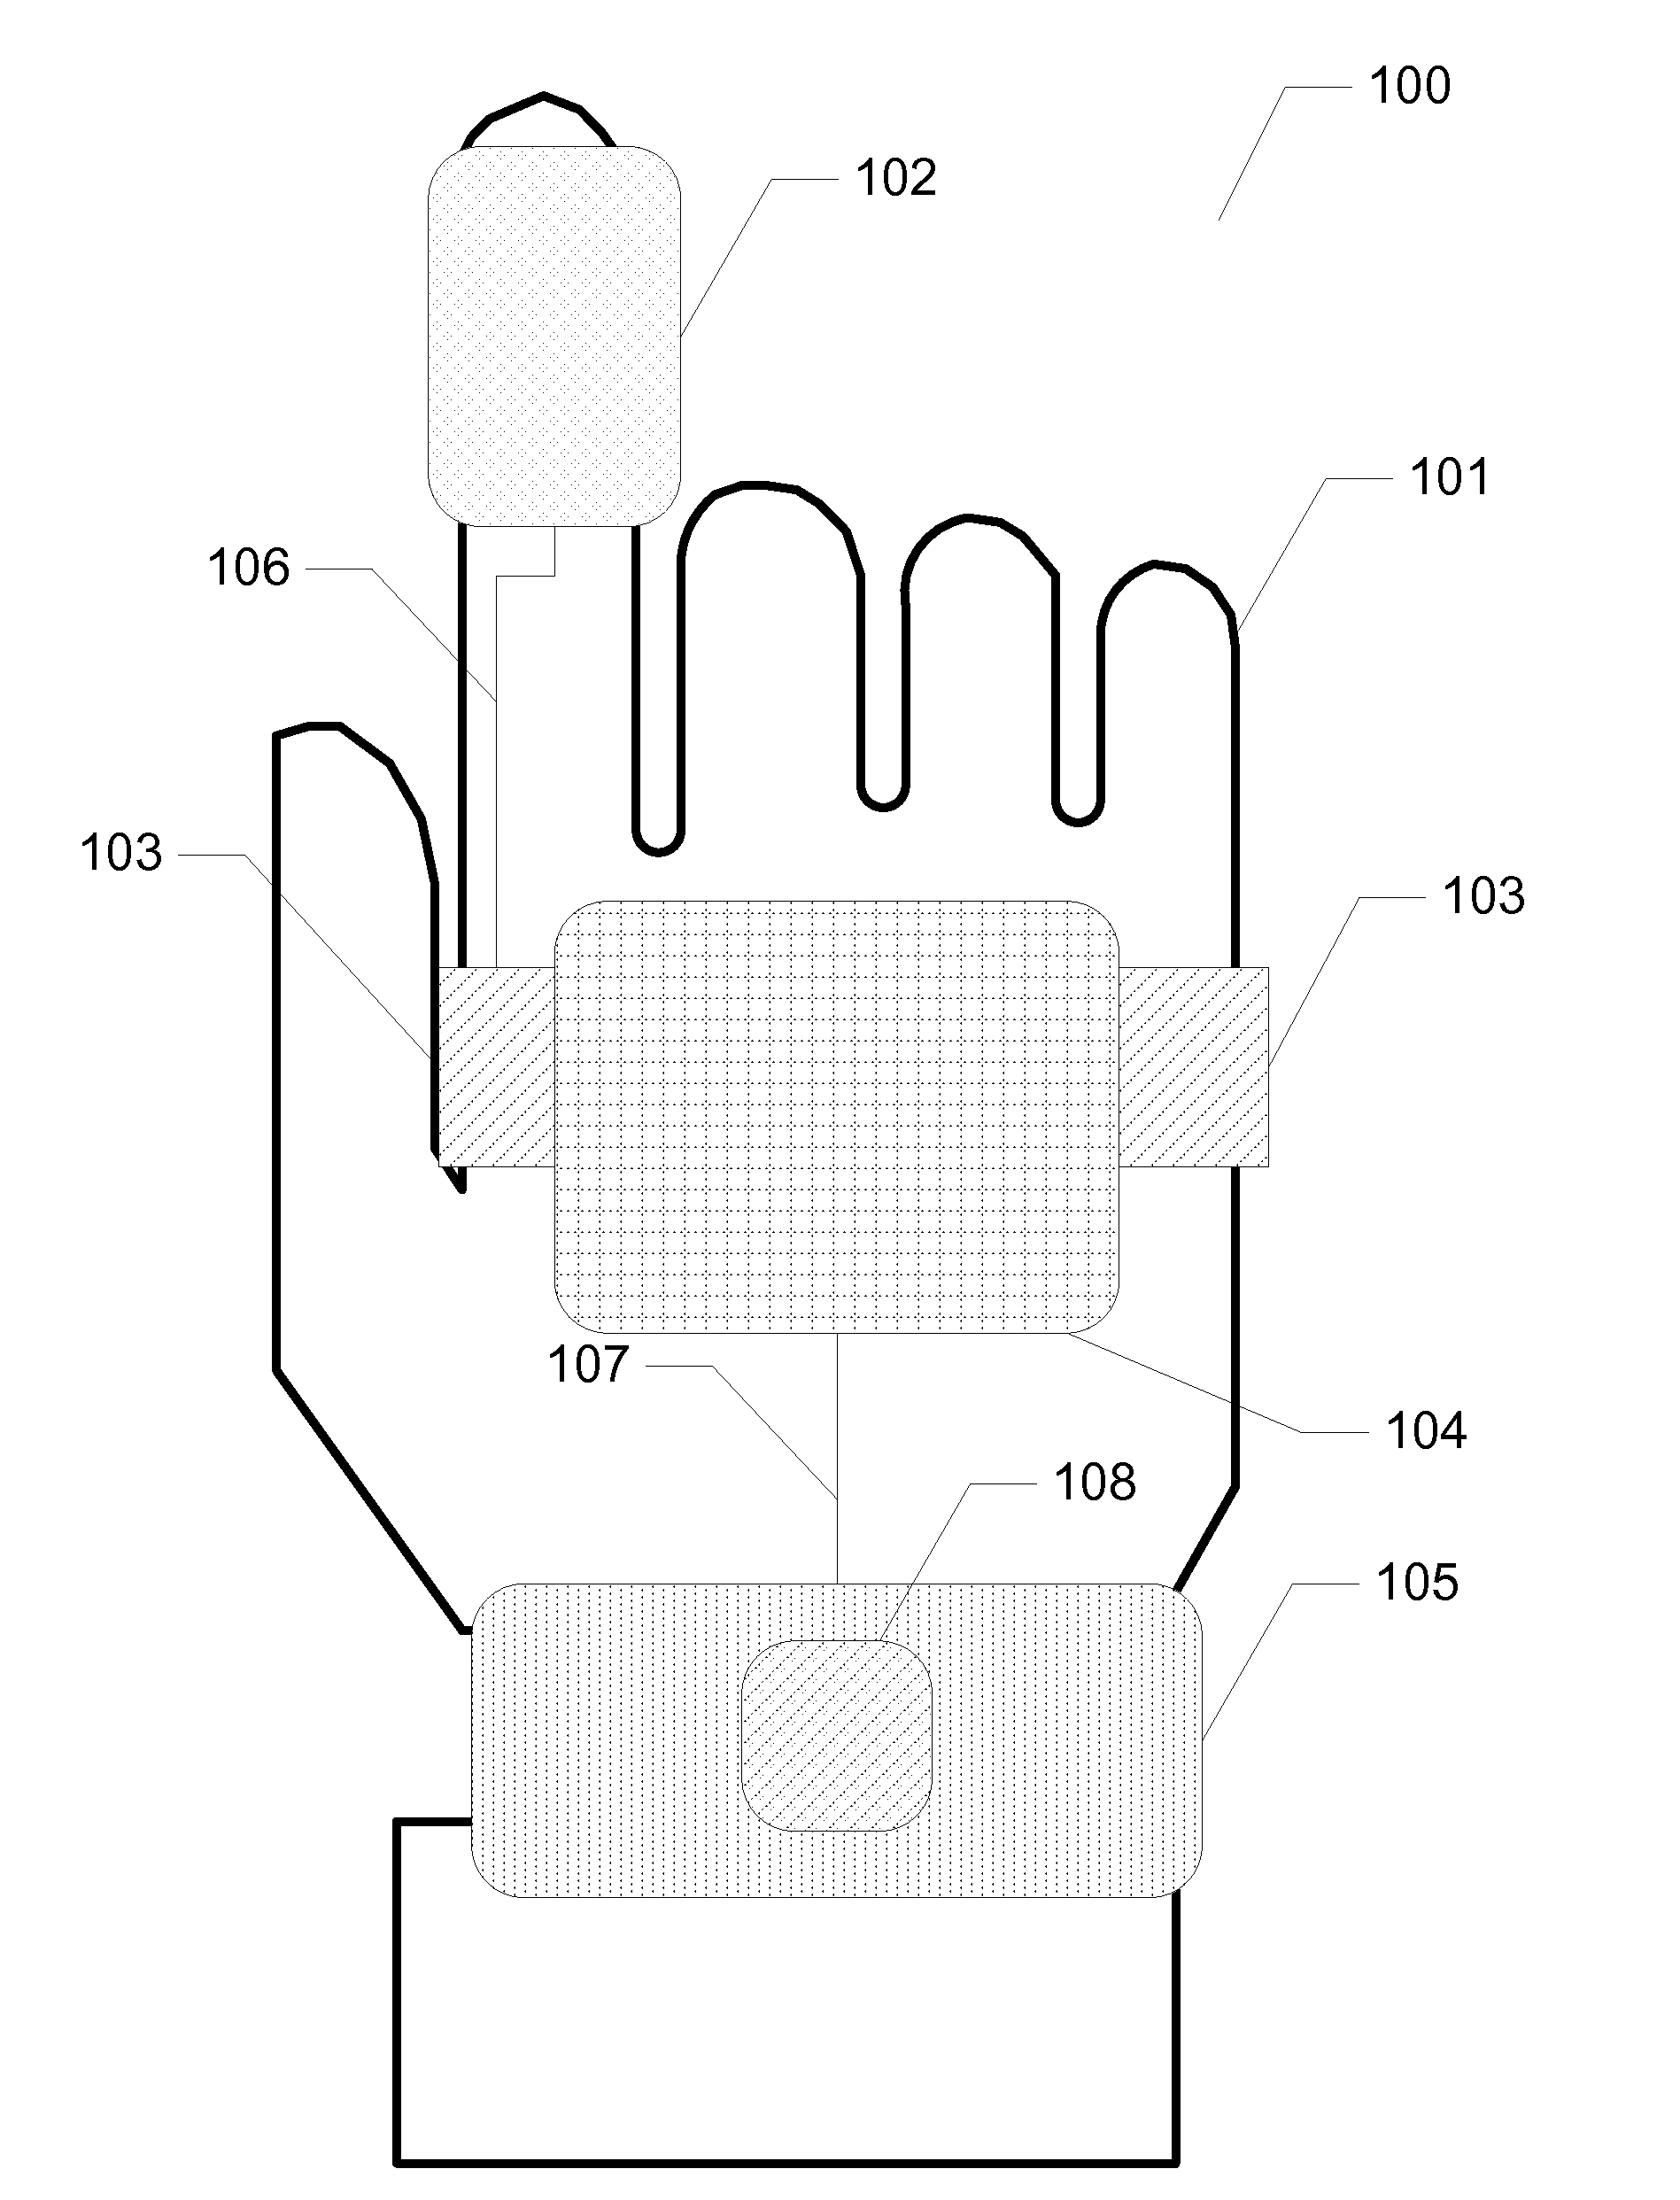 Method and Apparatus for Input Device